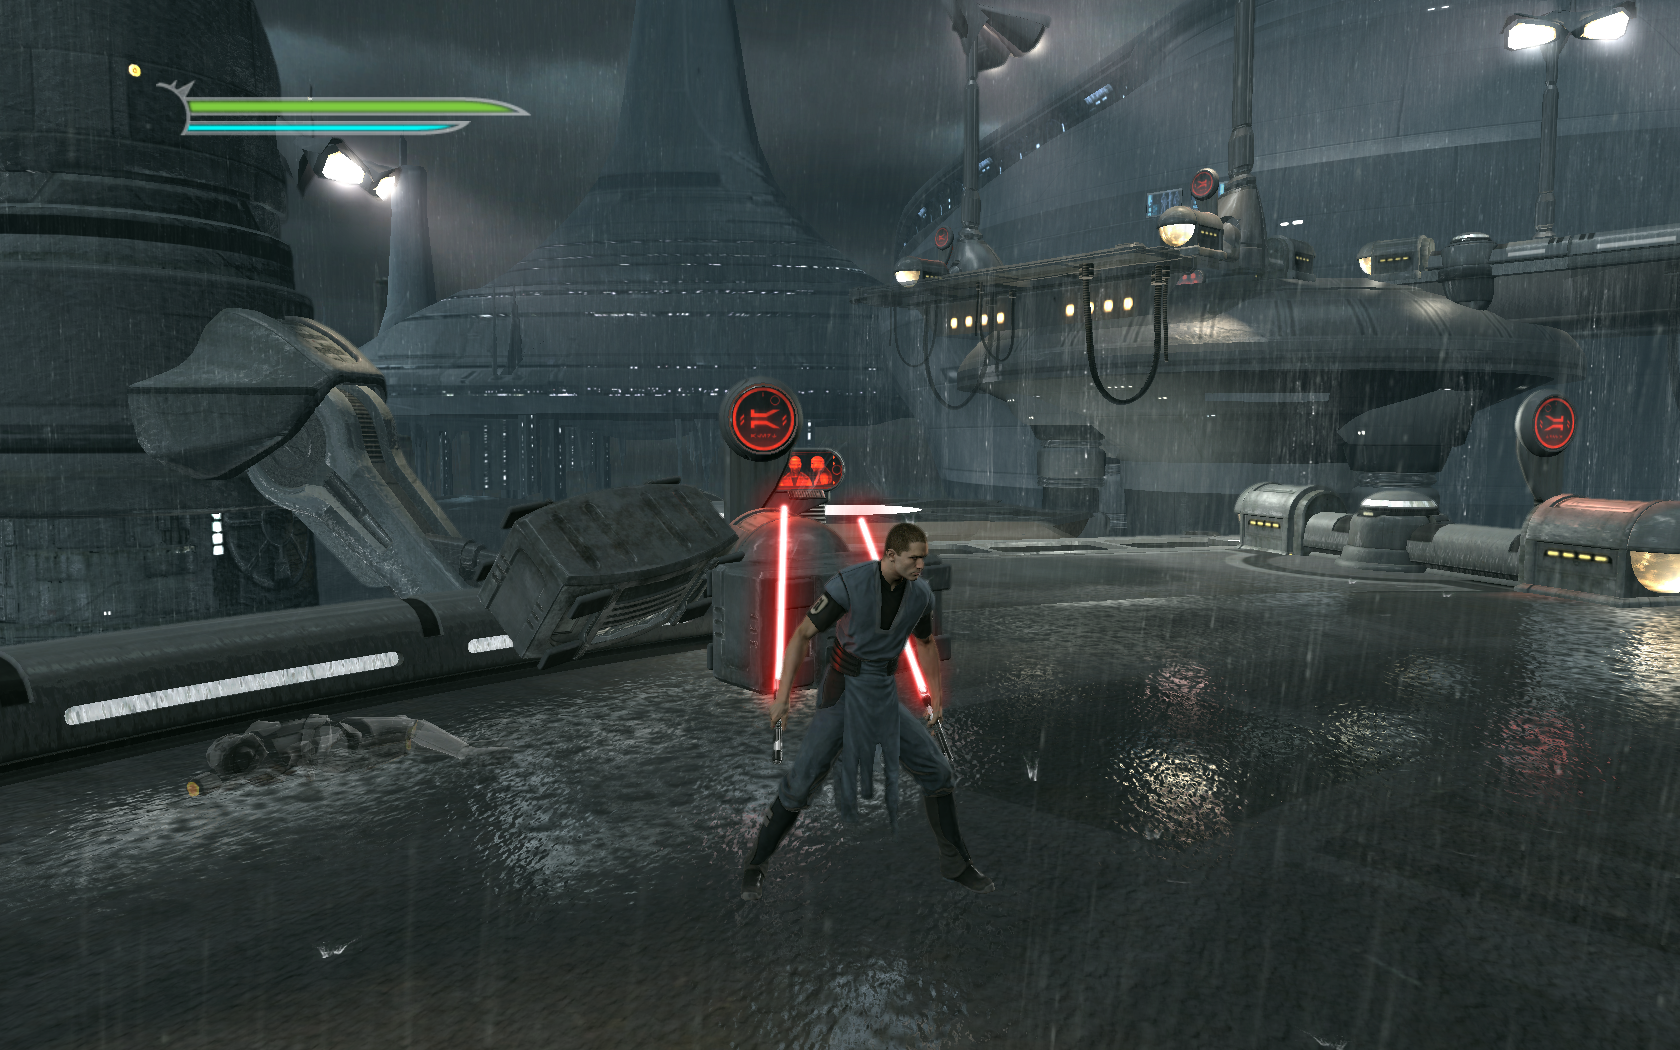 Игры star games. Star Wars unleashed 2. Стар ВАРС the Force unleashed 2. Игра Star Wars unleashed 3. Star Wars Starkiller игра.